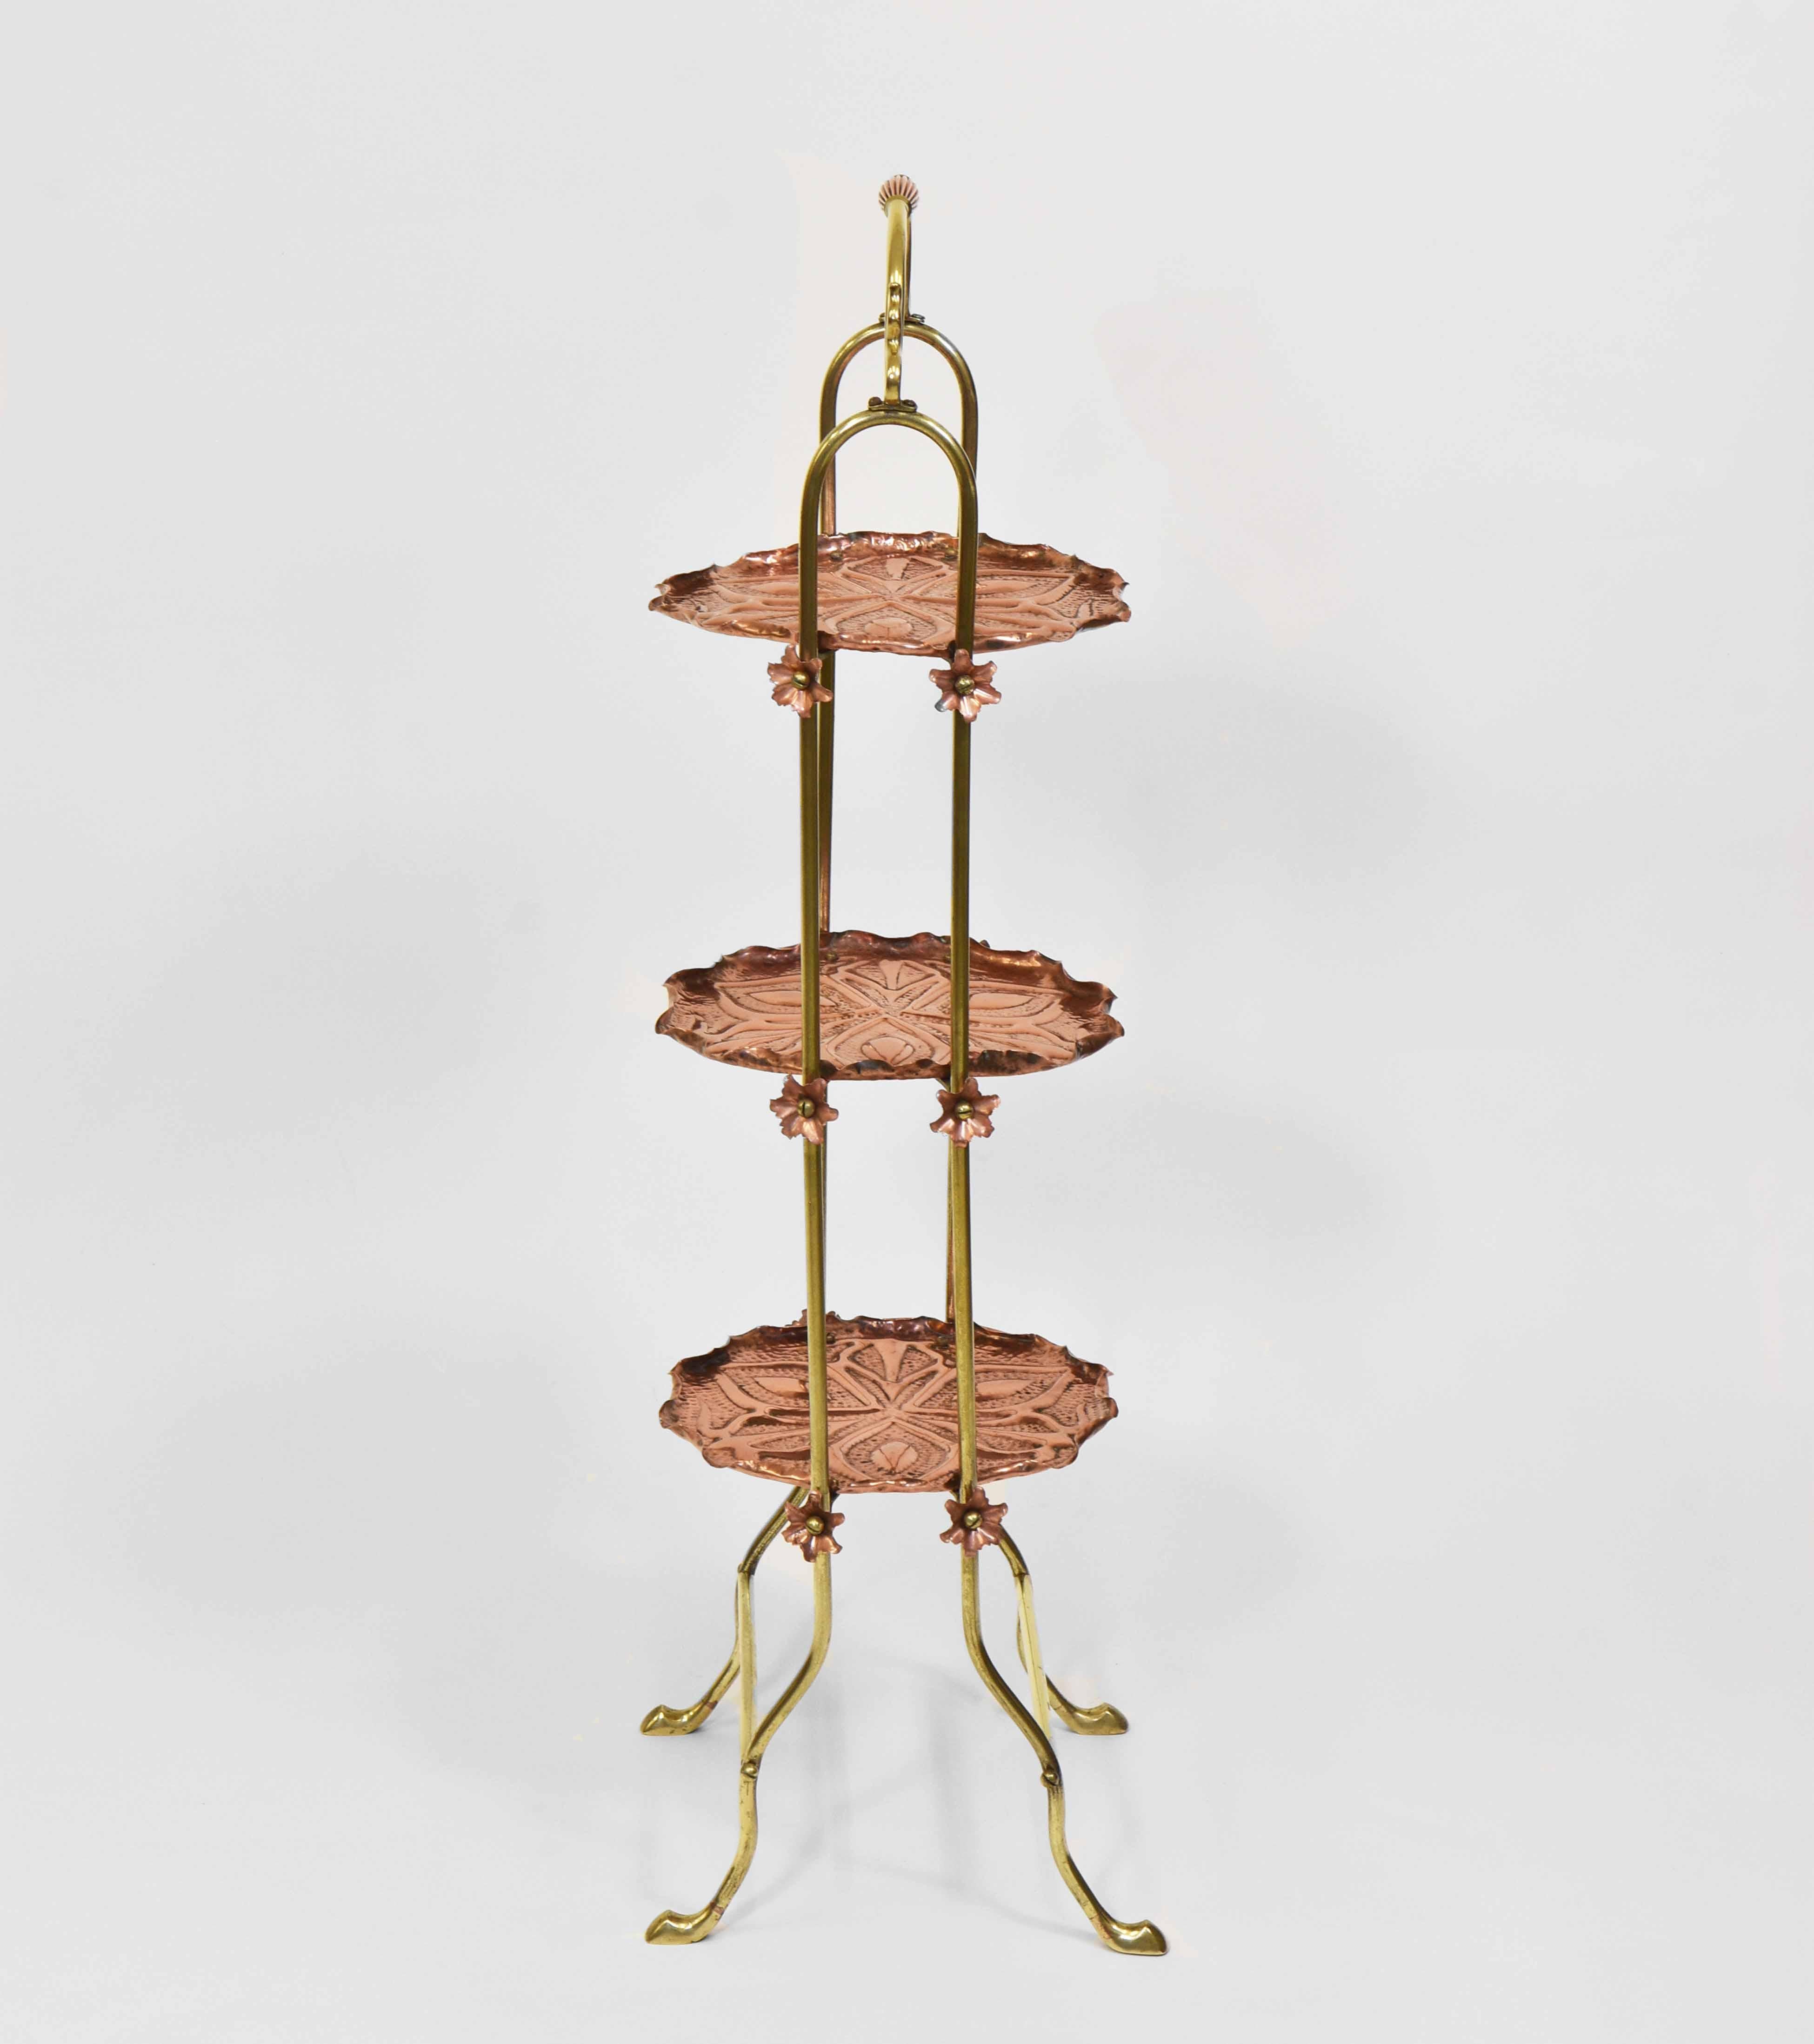 Hand-Crafted Art Nouveau Arts & Crafts Copper and Brass Cake Stand For Sale